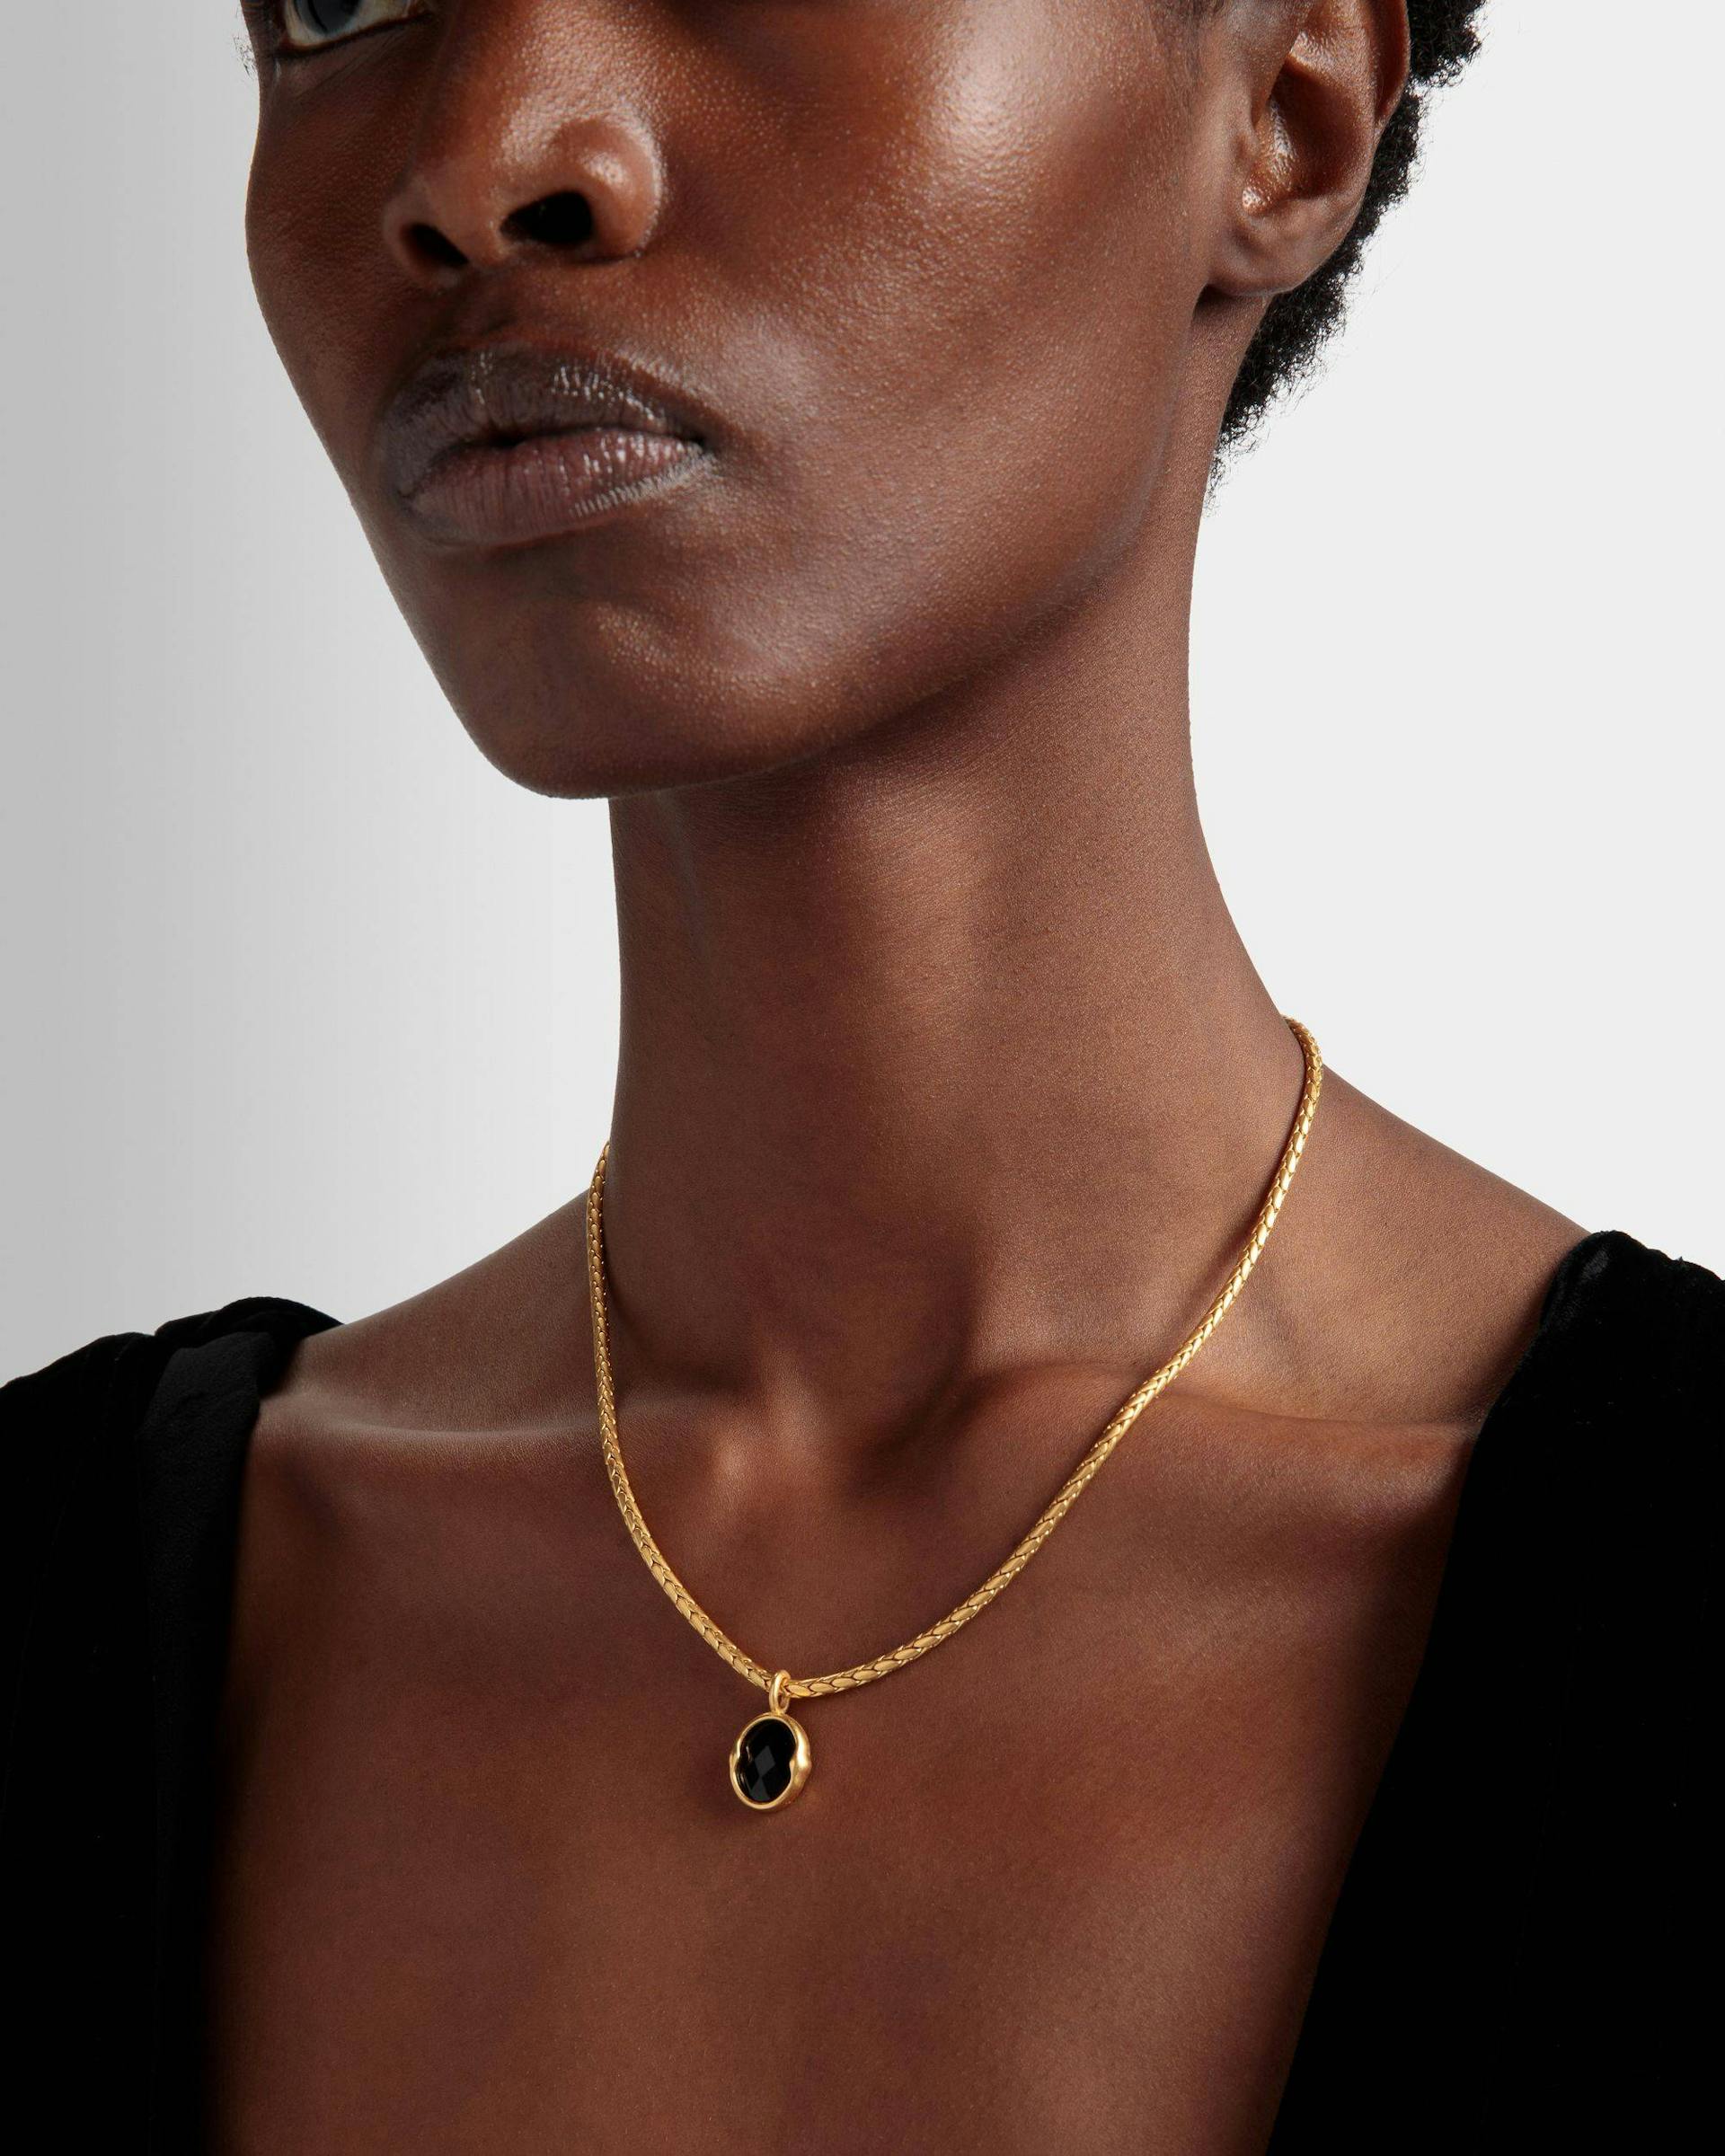 Women's Frame Outline Necklace With A Snake Chain | Bally | On Model Front